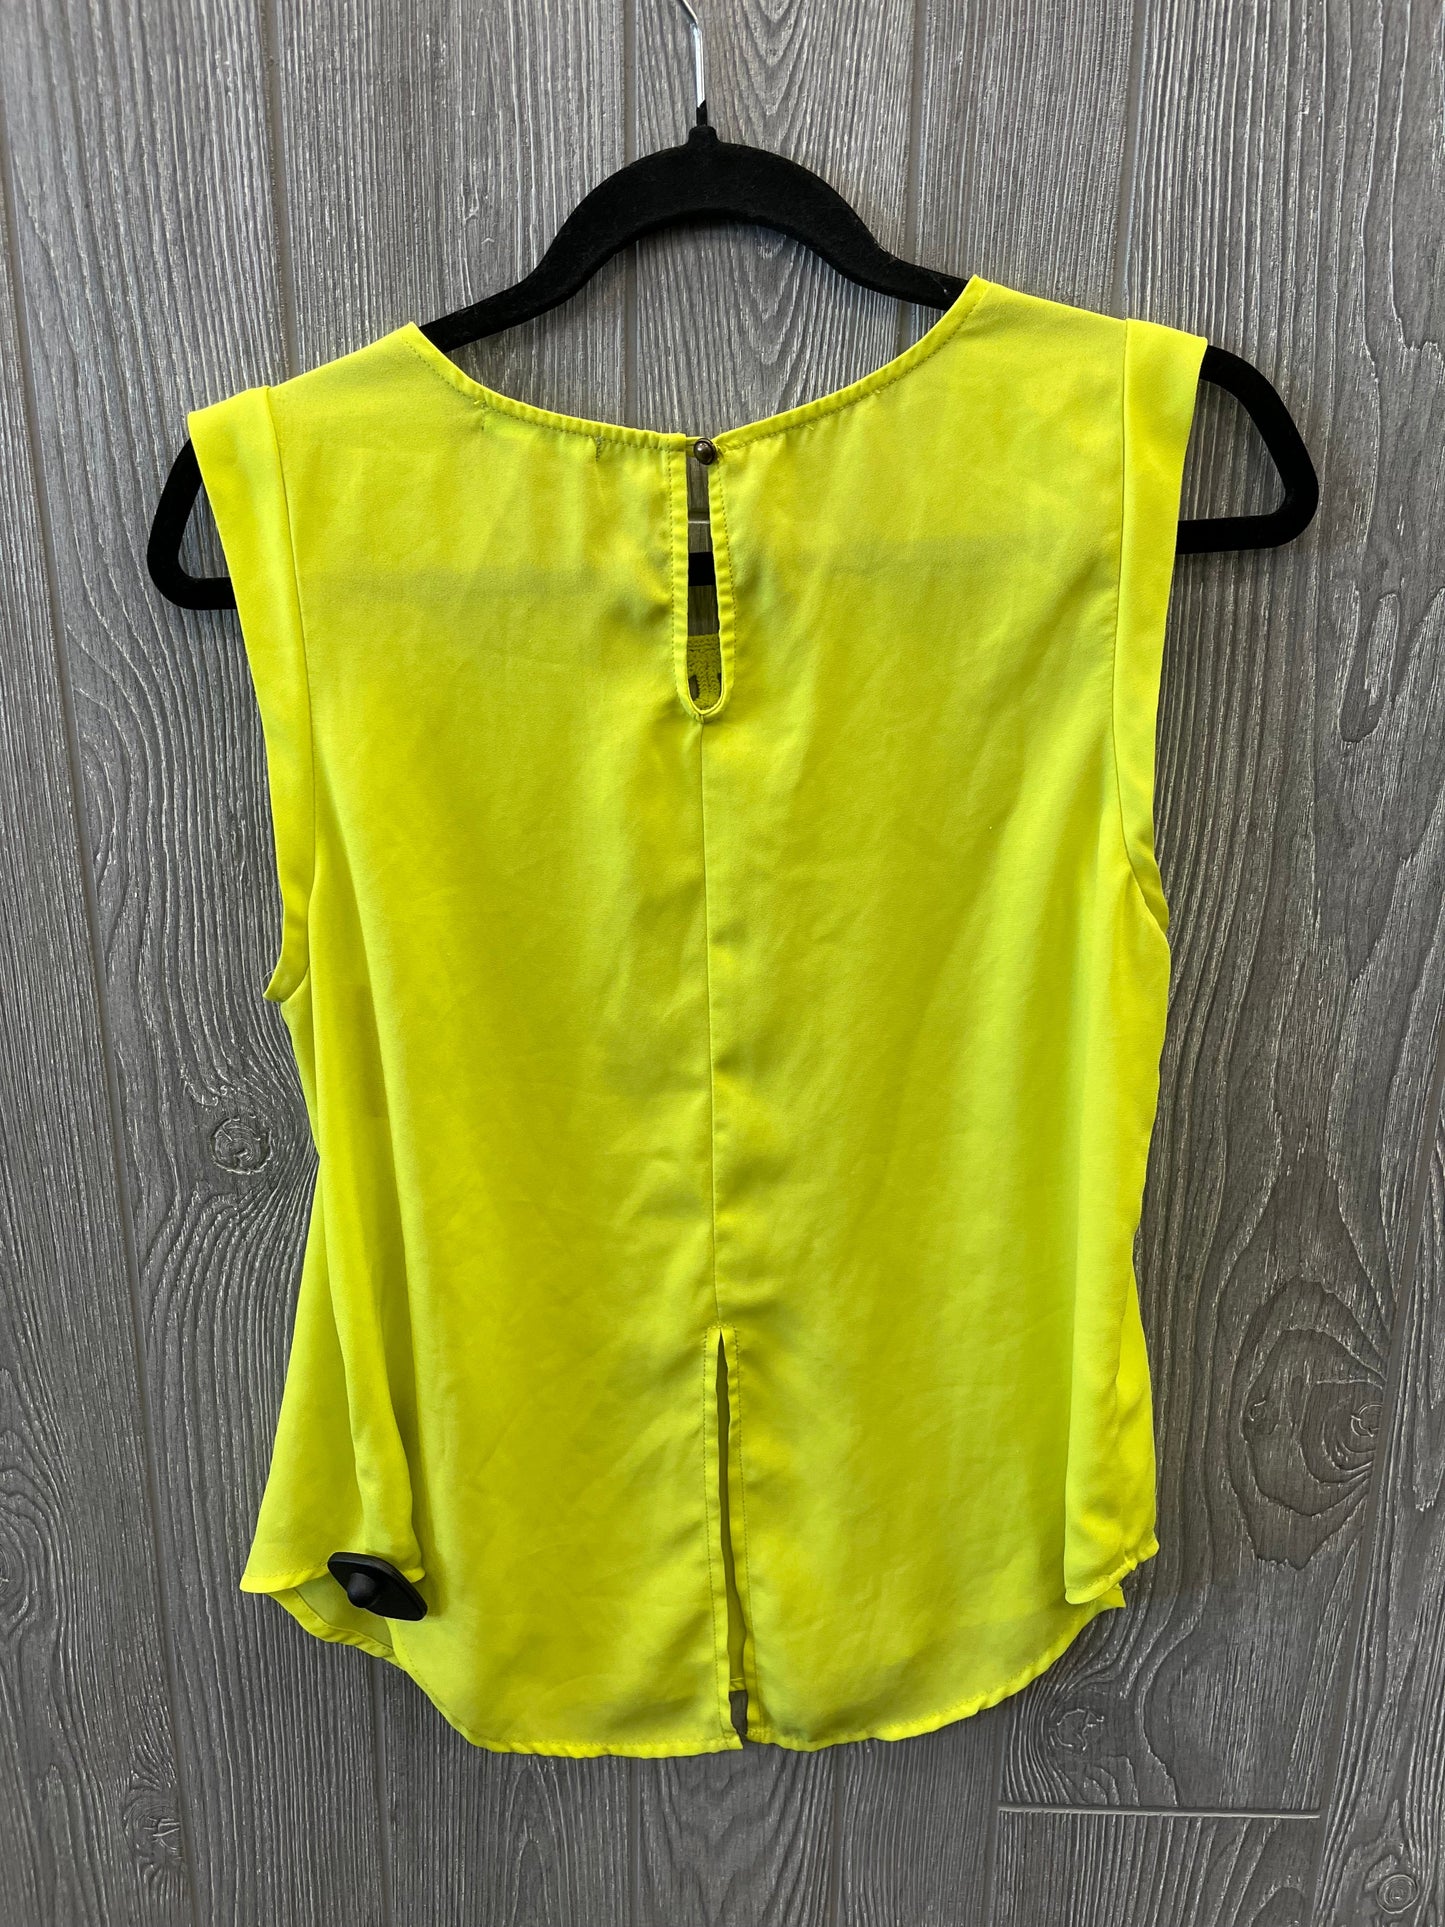 Yellow Top Sleeveless Maurices, Size S